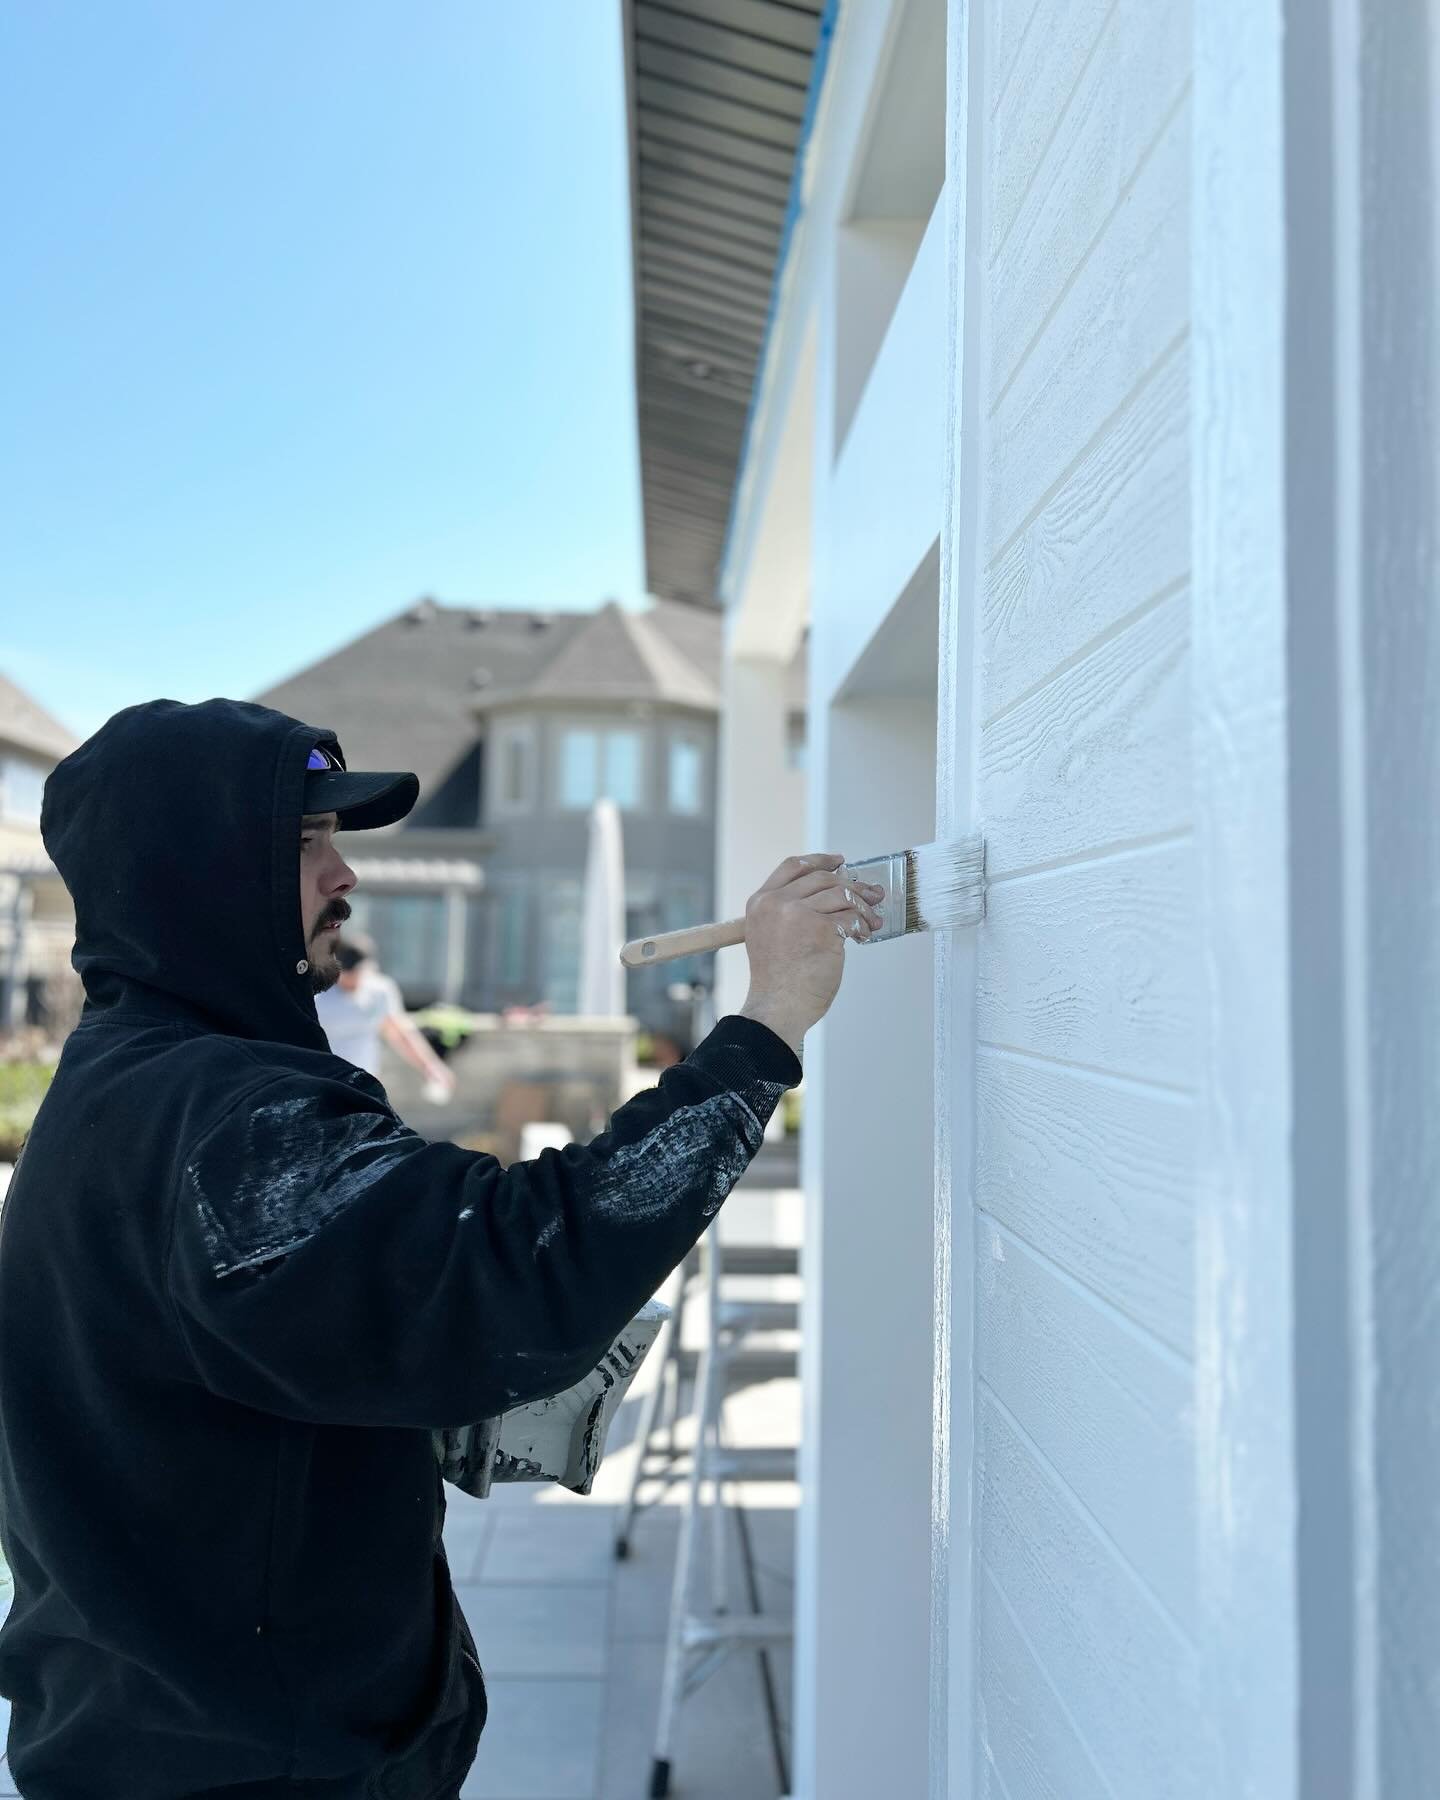 Pauly Picasso

Interior &amp; Exterior Painting services available! 

Call us today 🤘🏼 

(905) 541-5888 
www.beyondthesite.ca 

#beyondthesite #onsite #BTS #jobsite #construction #hvac #milwaukee #carpentry #heating #homeimprovement #renovations #c